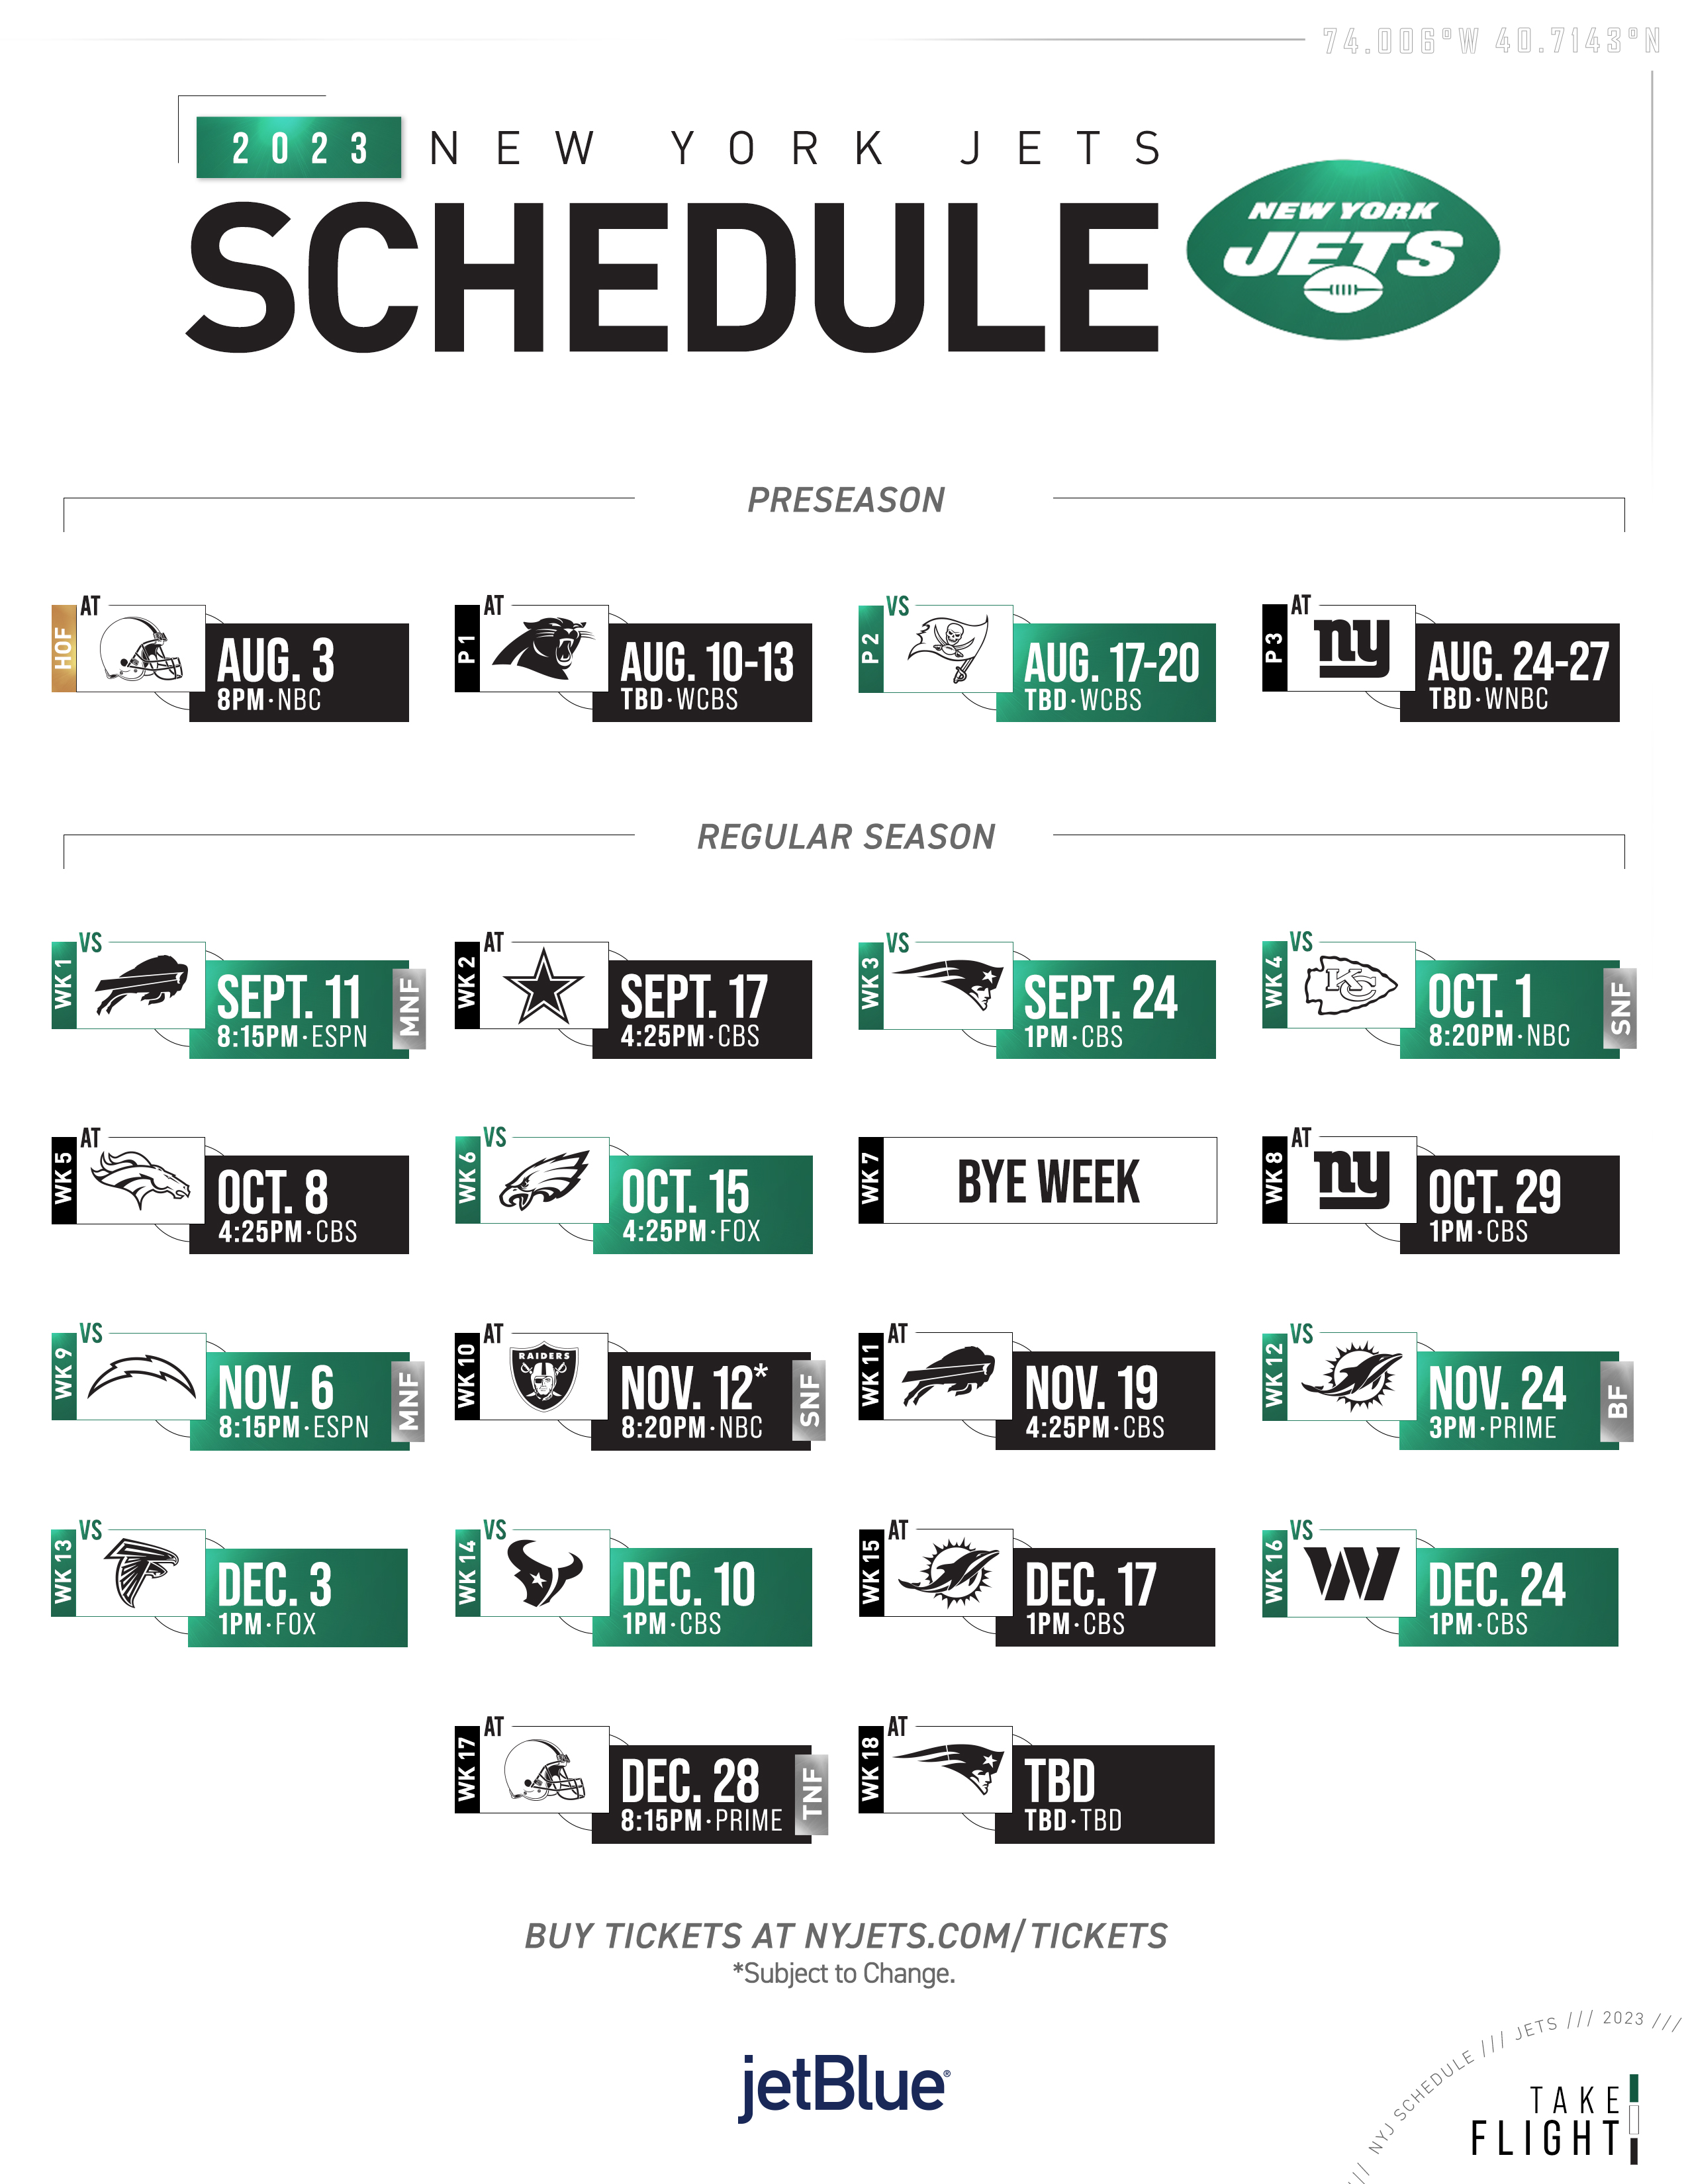 jets games at home